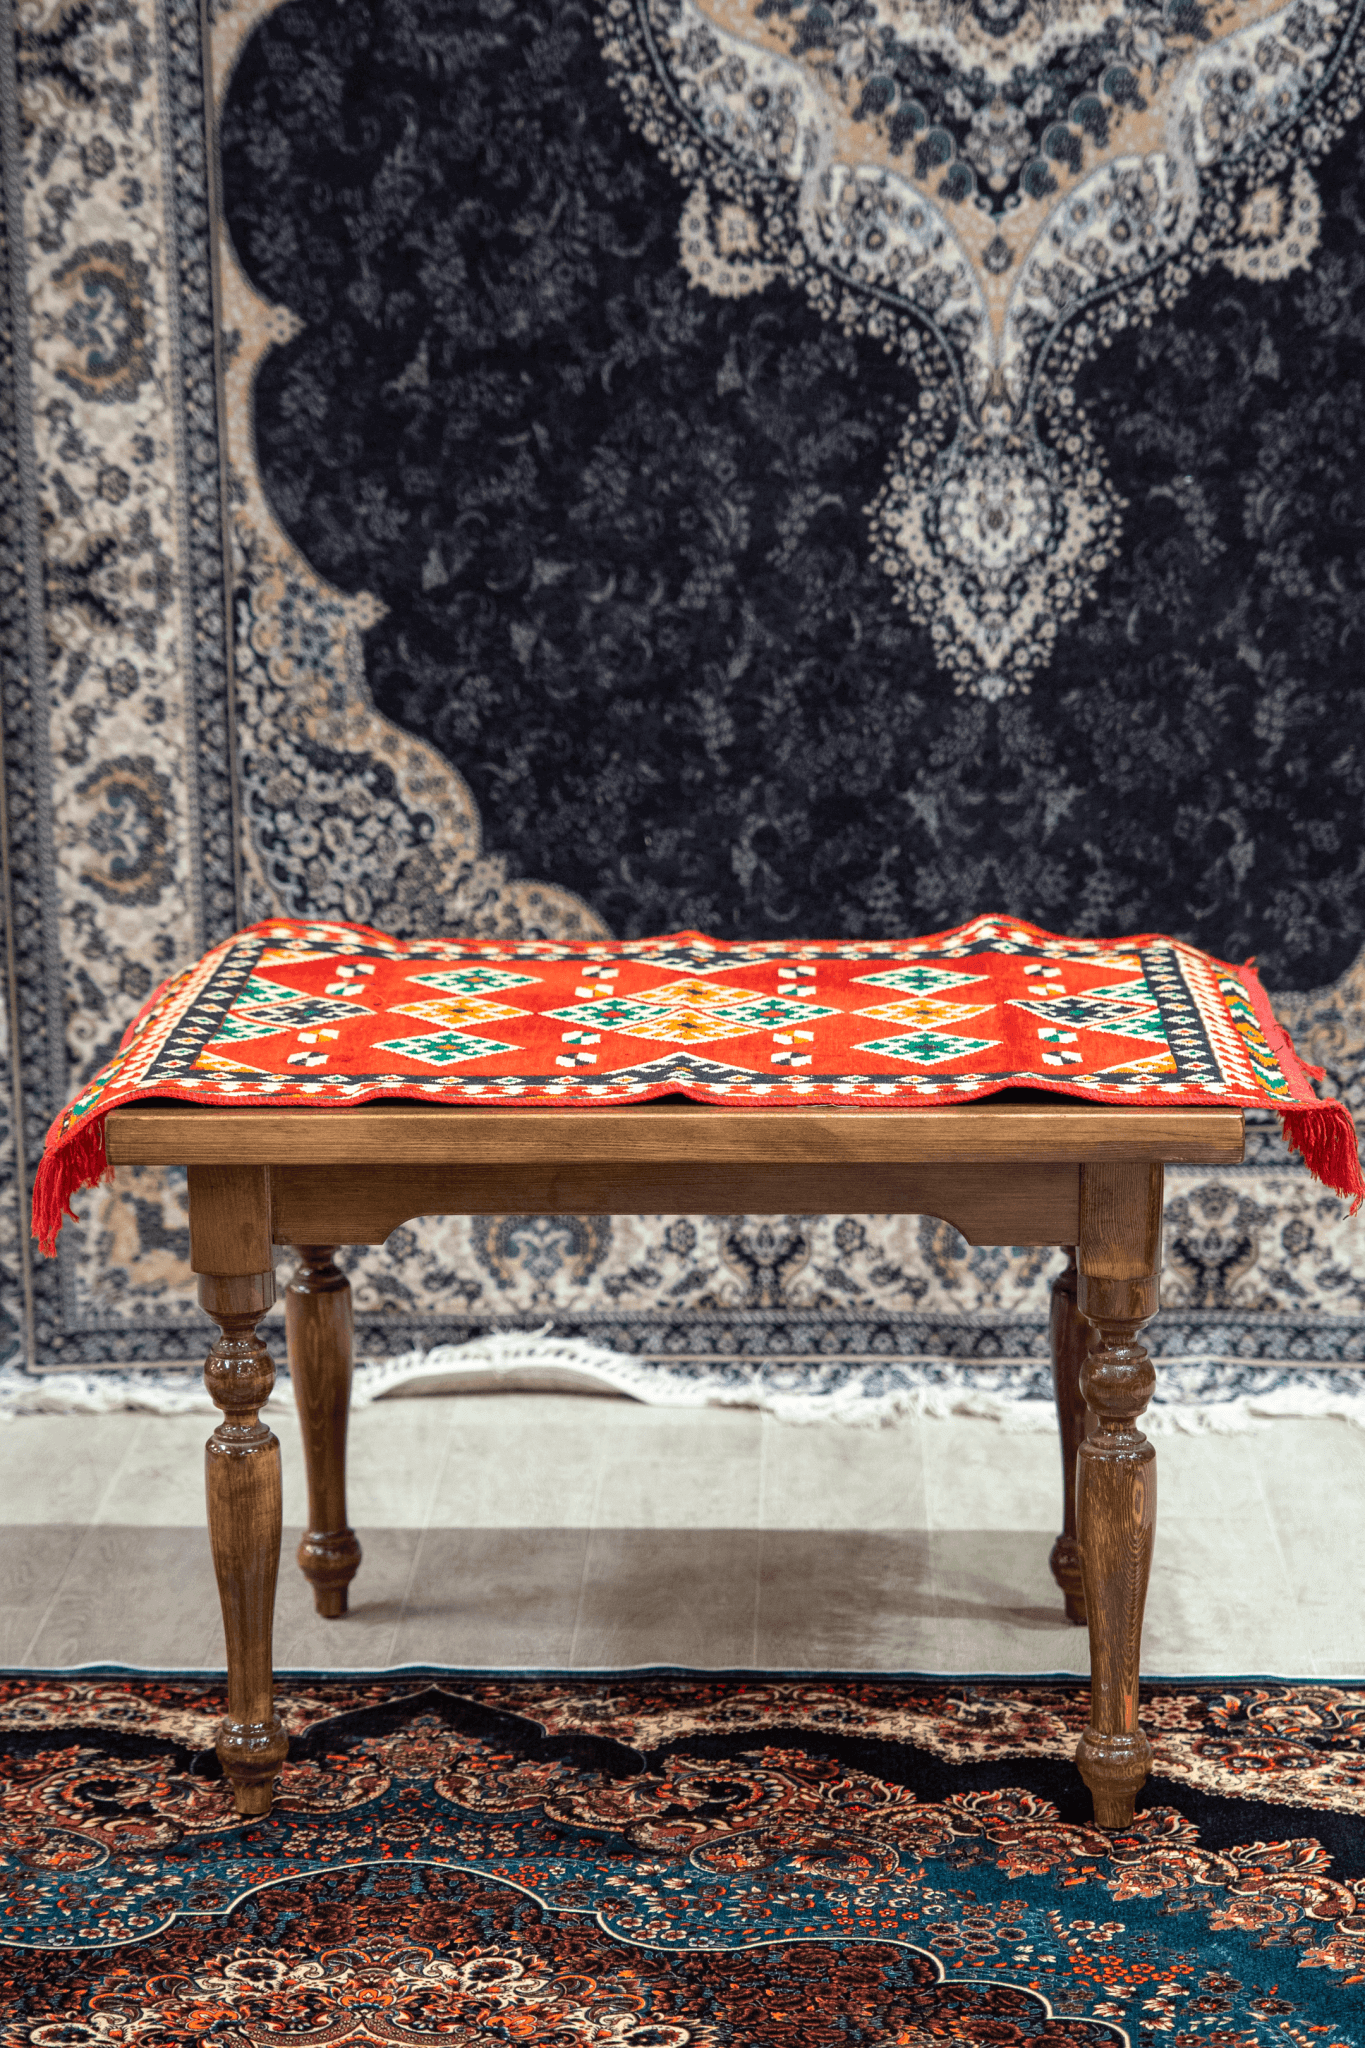 Authentic Coffee TableAuthentic table is made in Turkiye. Featuring a timeless design, this table will make a stylish addition to any room. Its solid wood construction ensures strength and durability, making it ideal for everyday use. Enjoy for years to c